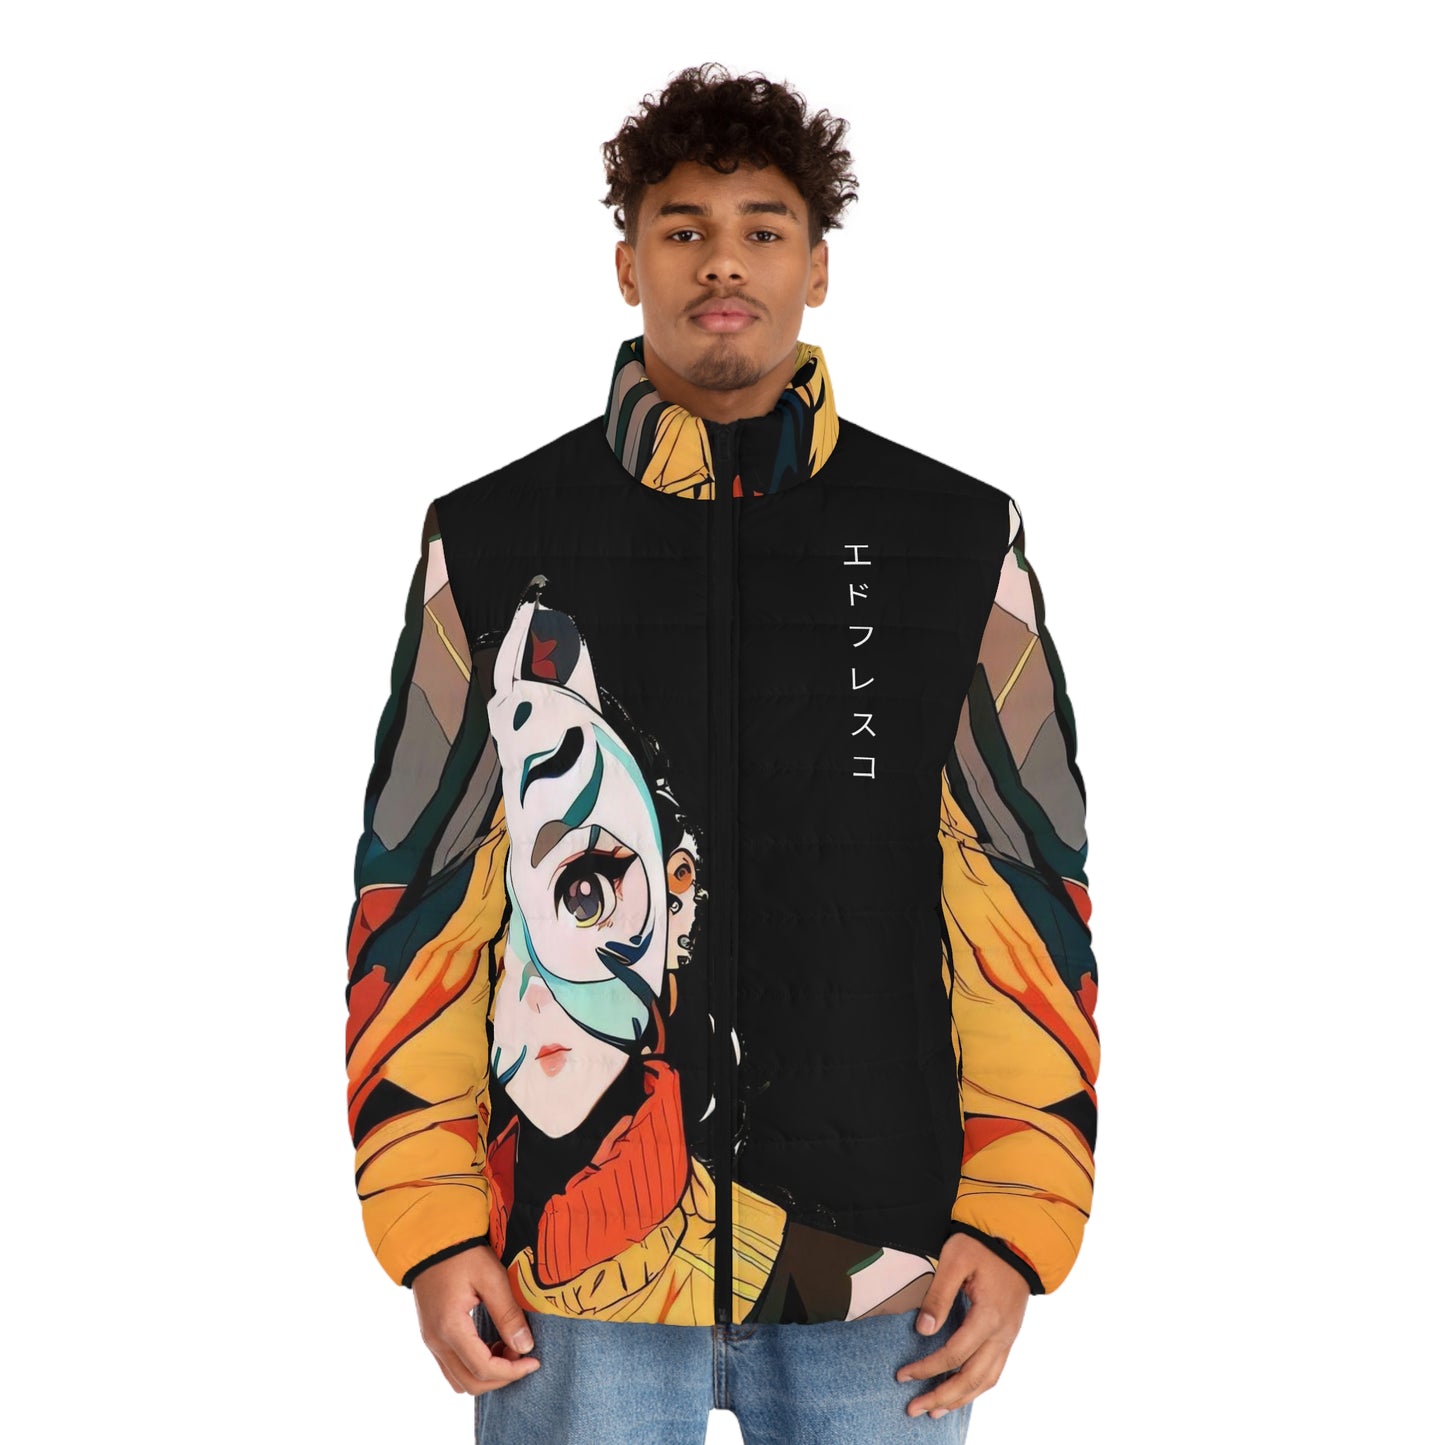 Anime Style Art Men's Puffer Jacket (AOP)- "Kat on the Attack"